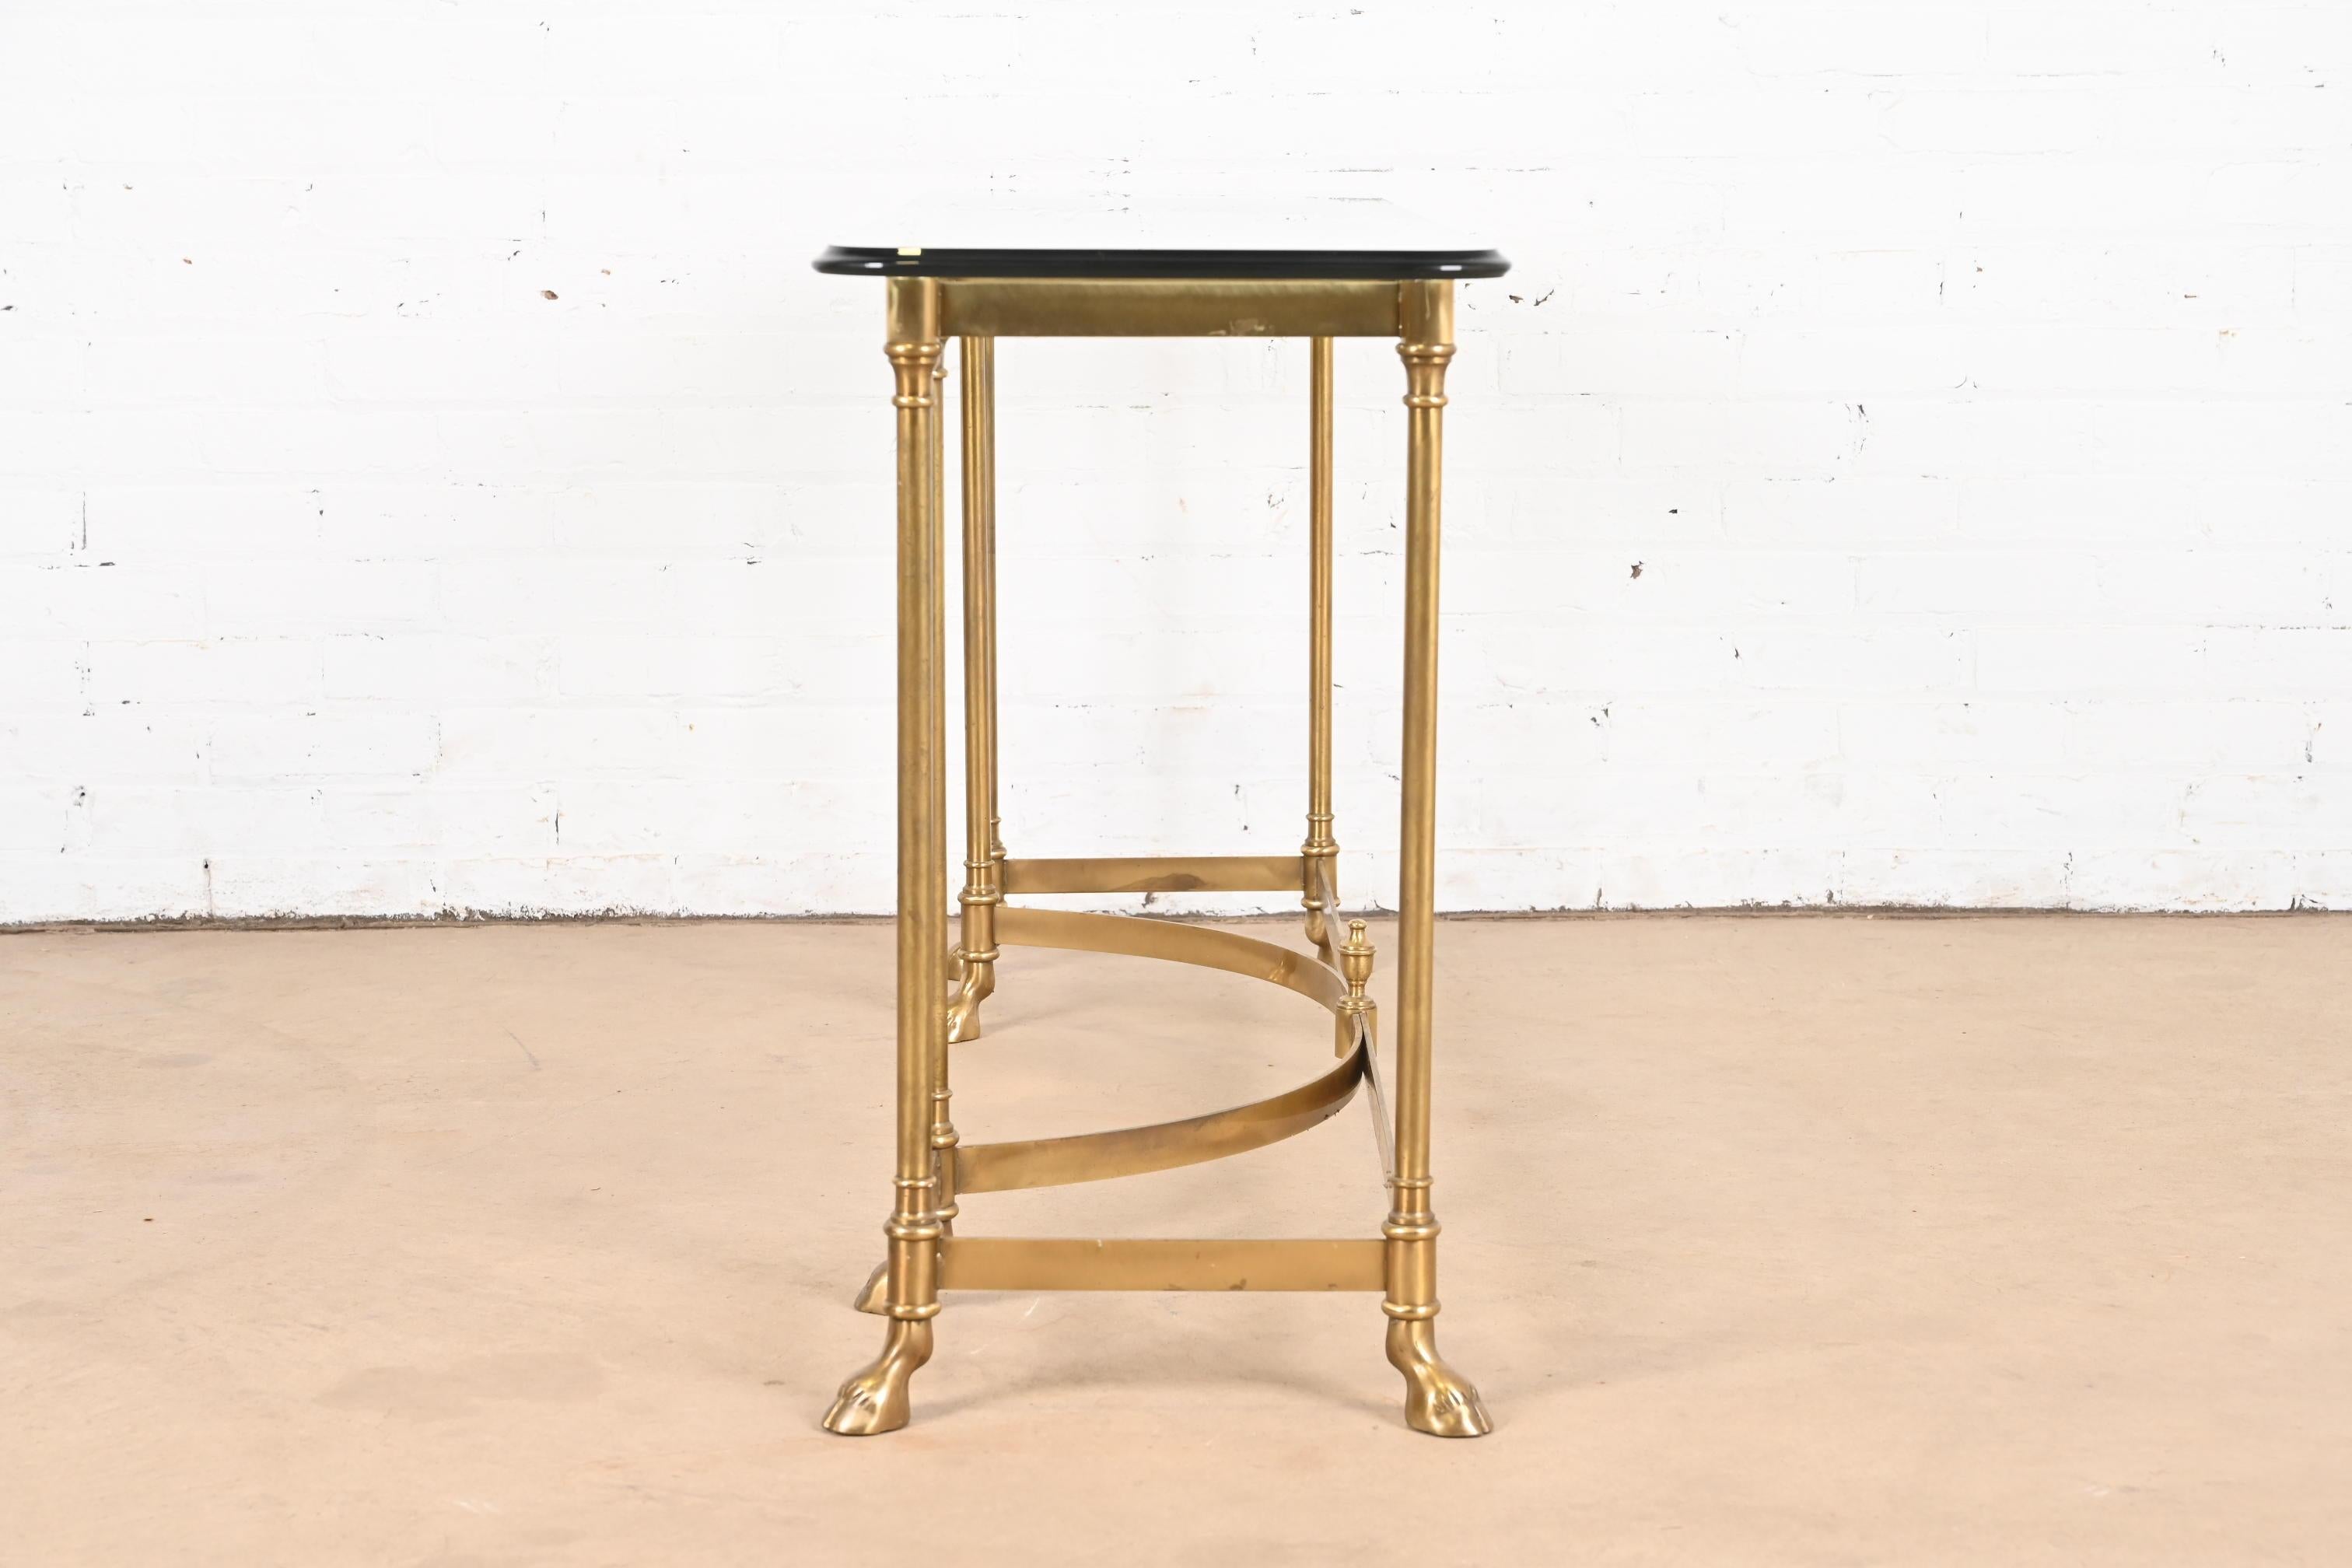 Labarge Hollywood Regency Brass and Glass Hooved Feet Console Table, Circa 1960s For Sale 7